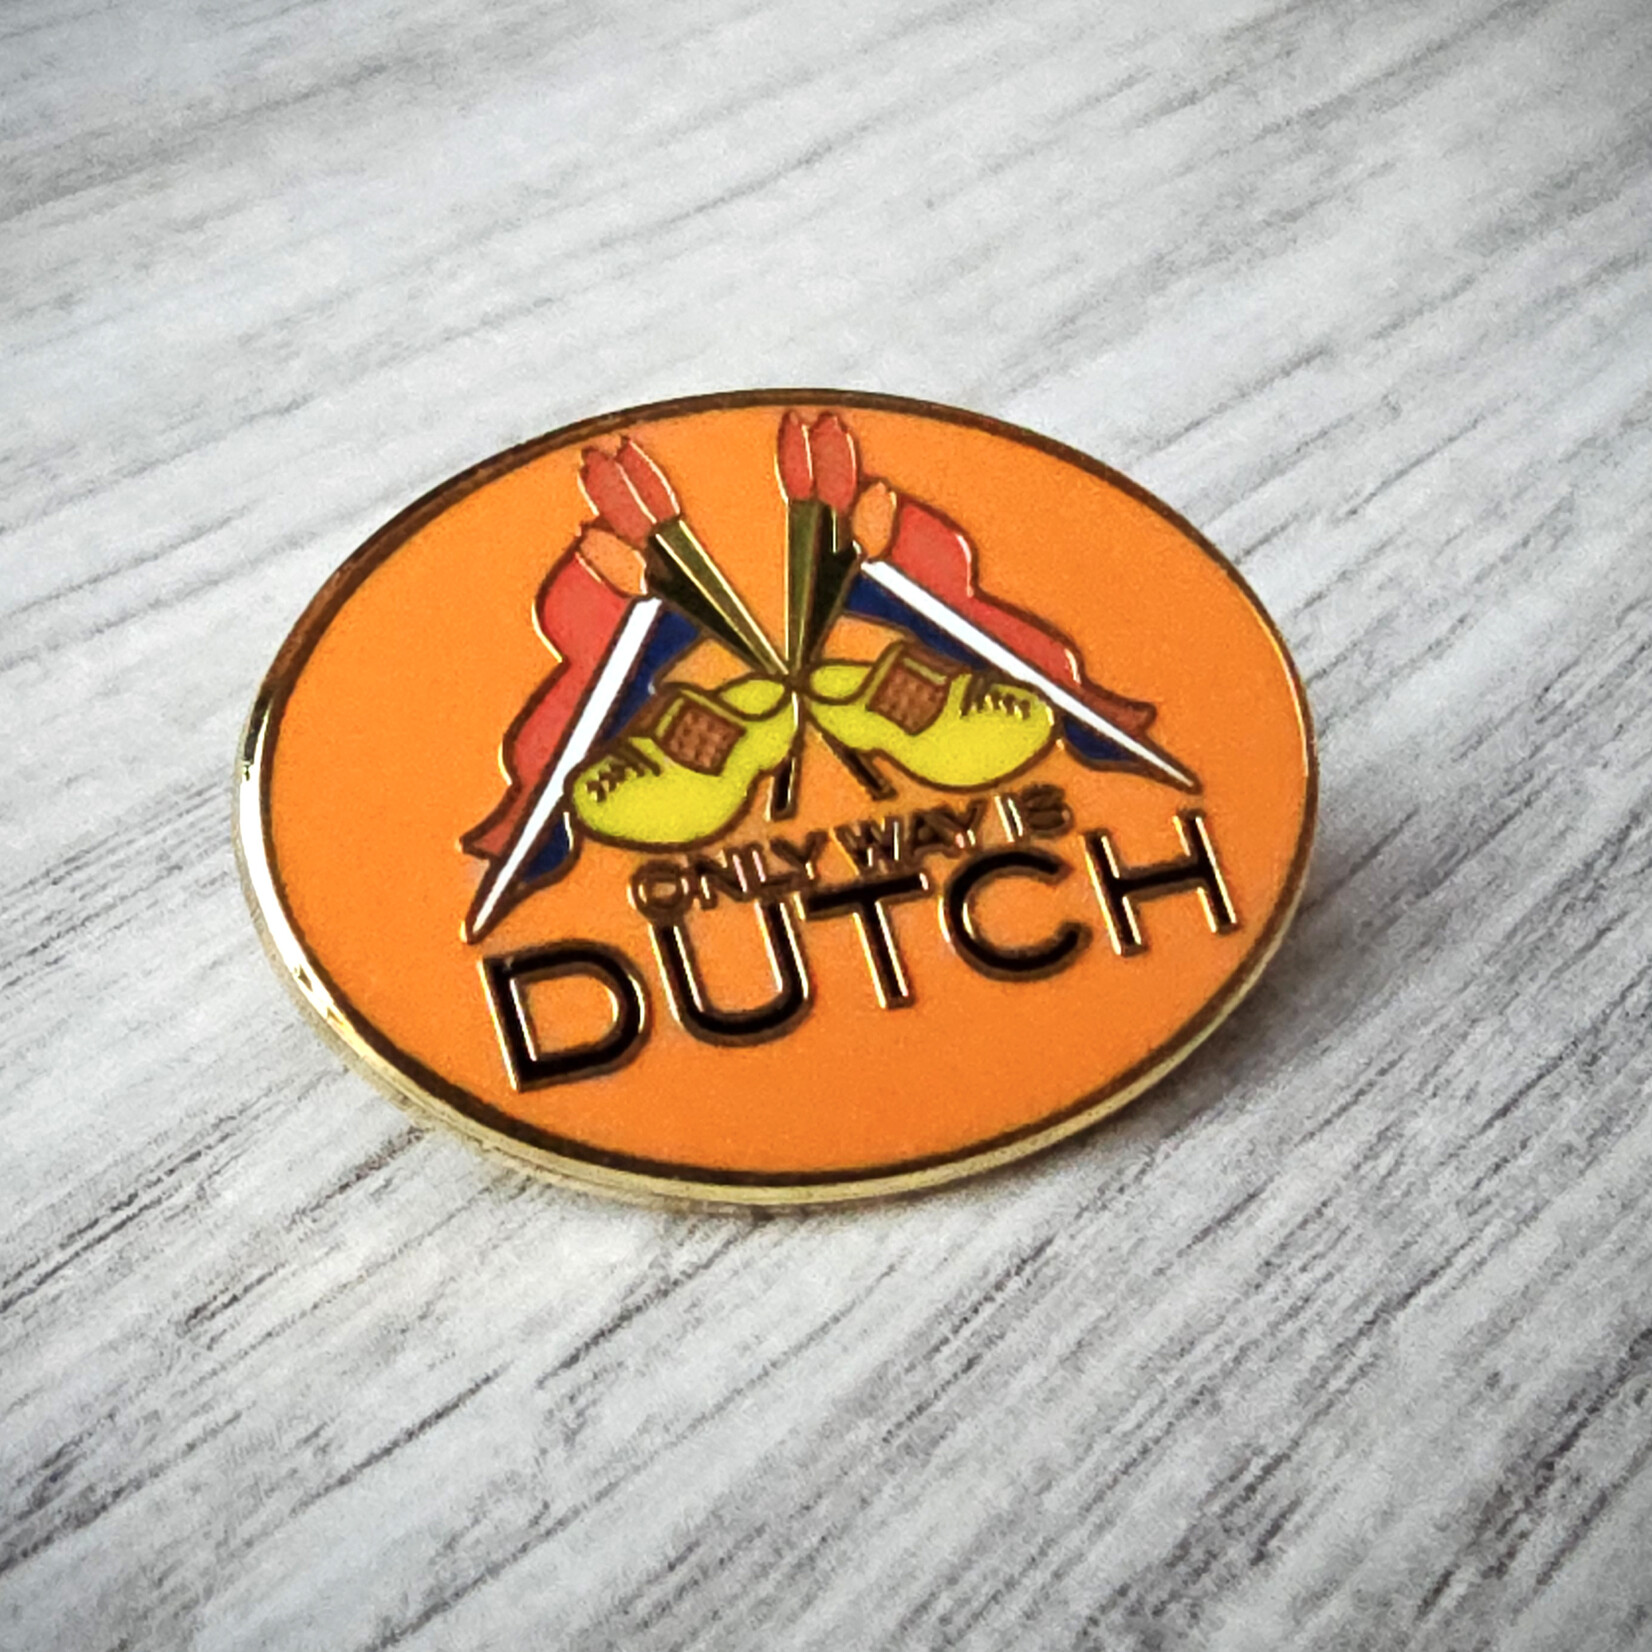 ONLY WAY IS DUTCH Only Way Is Dutch Pin - Oranje Flag